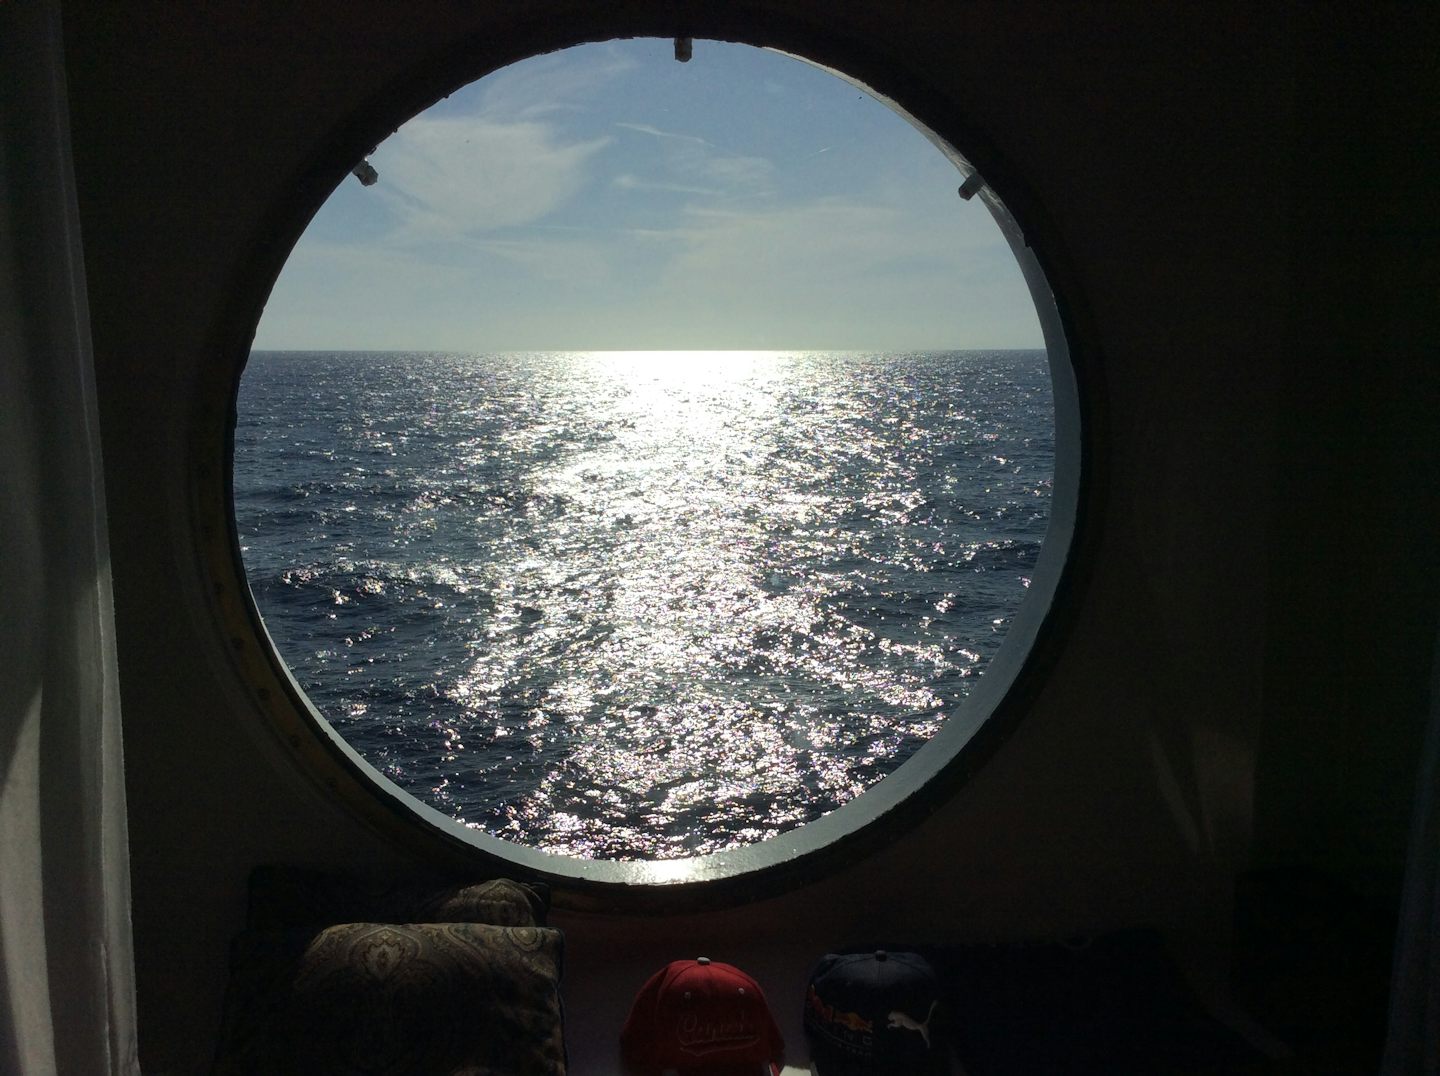 Our stateroom window.